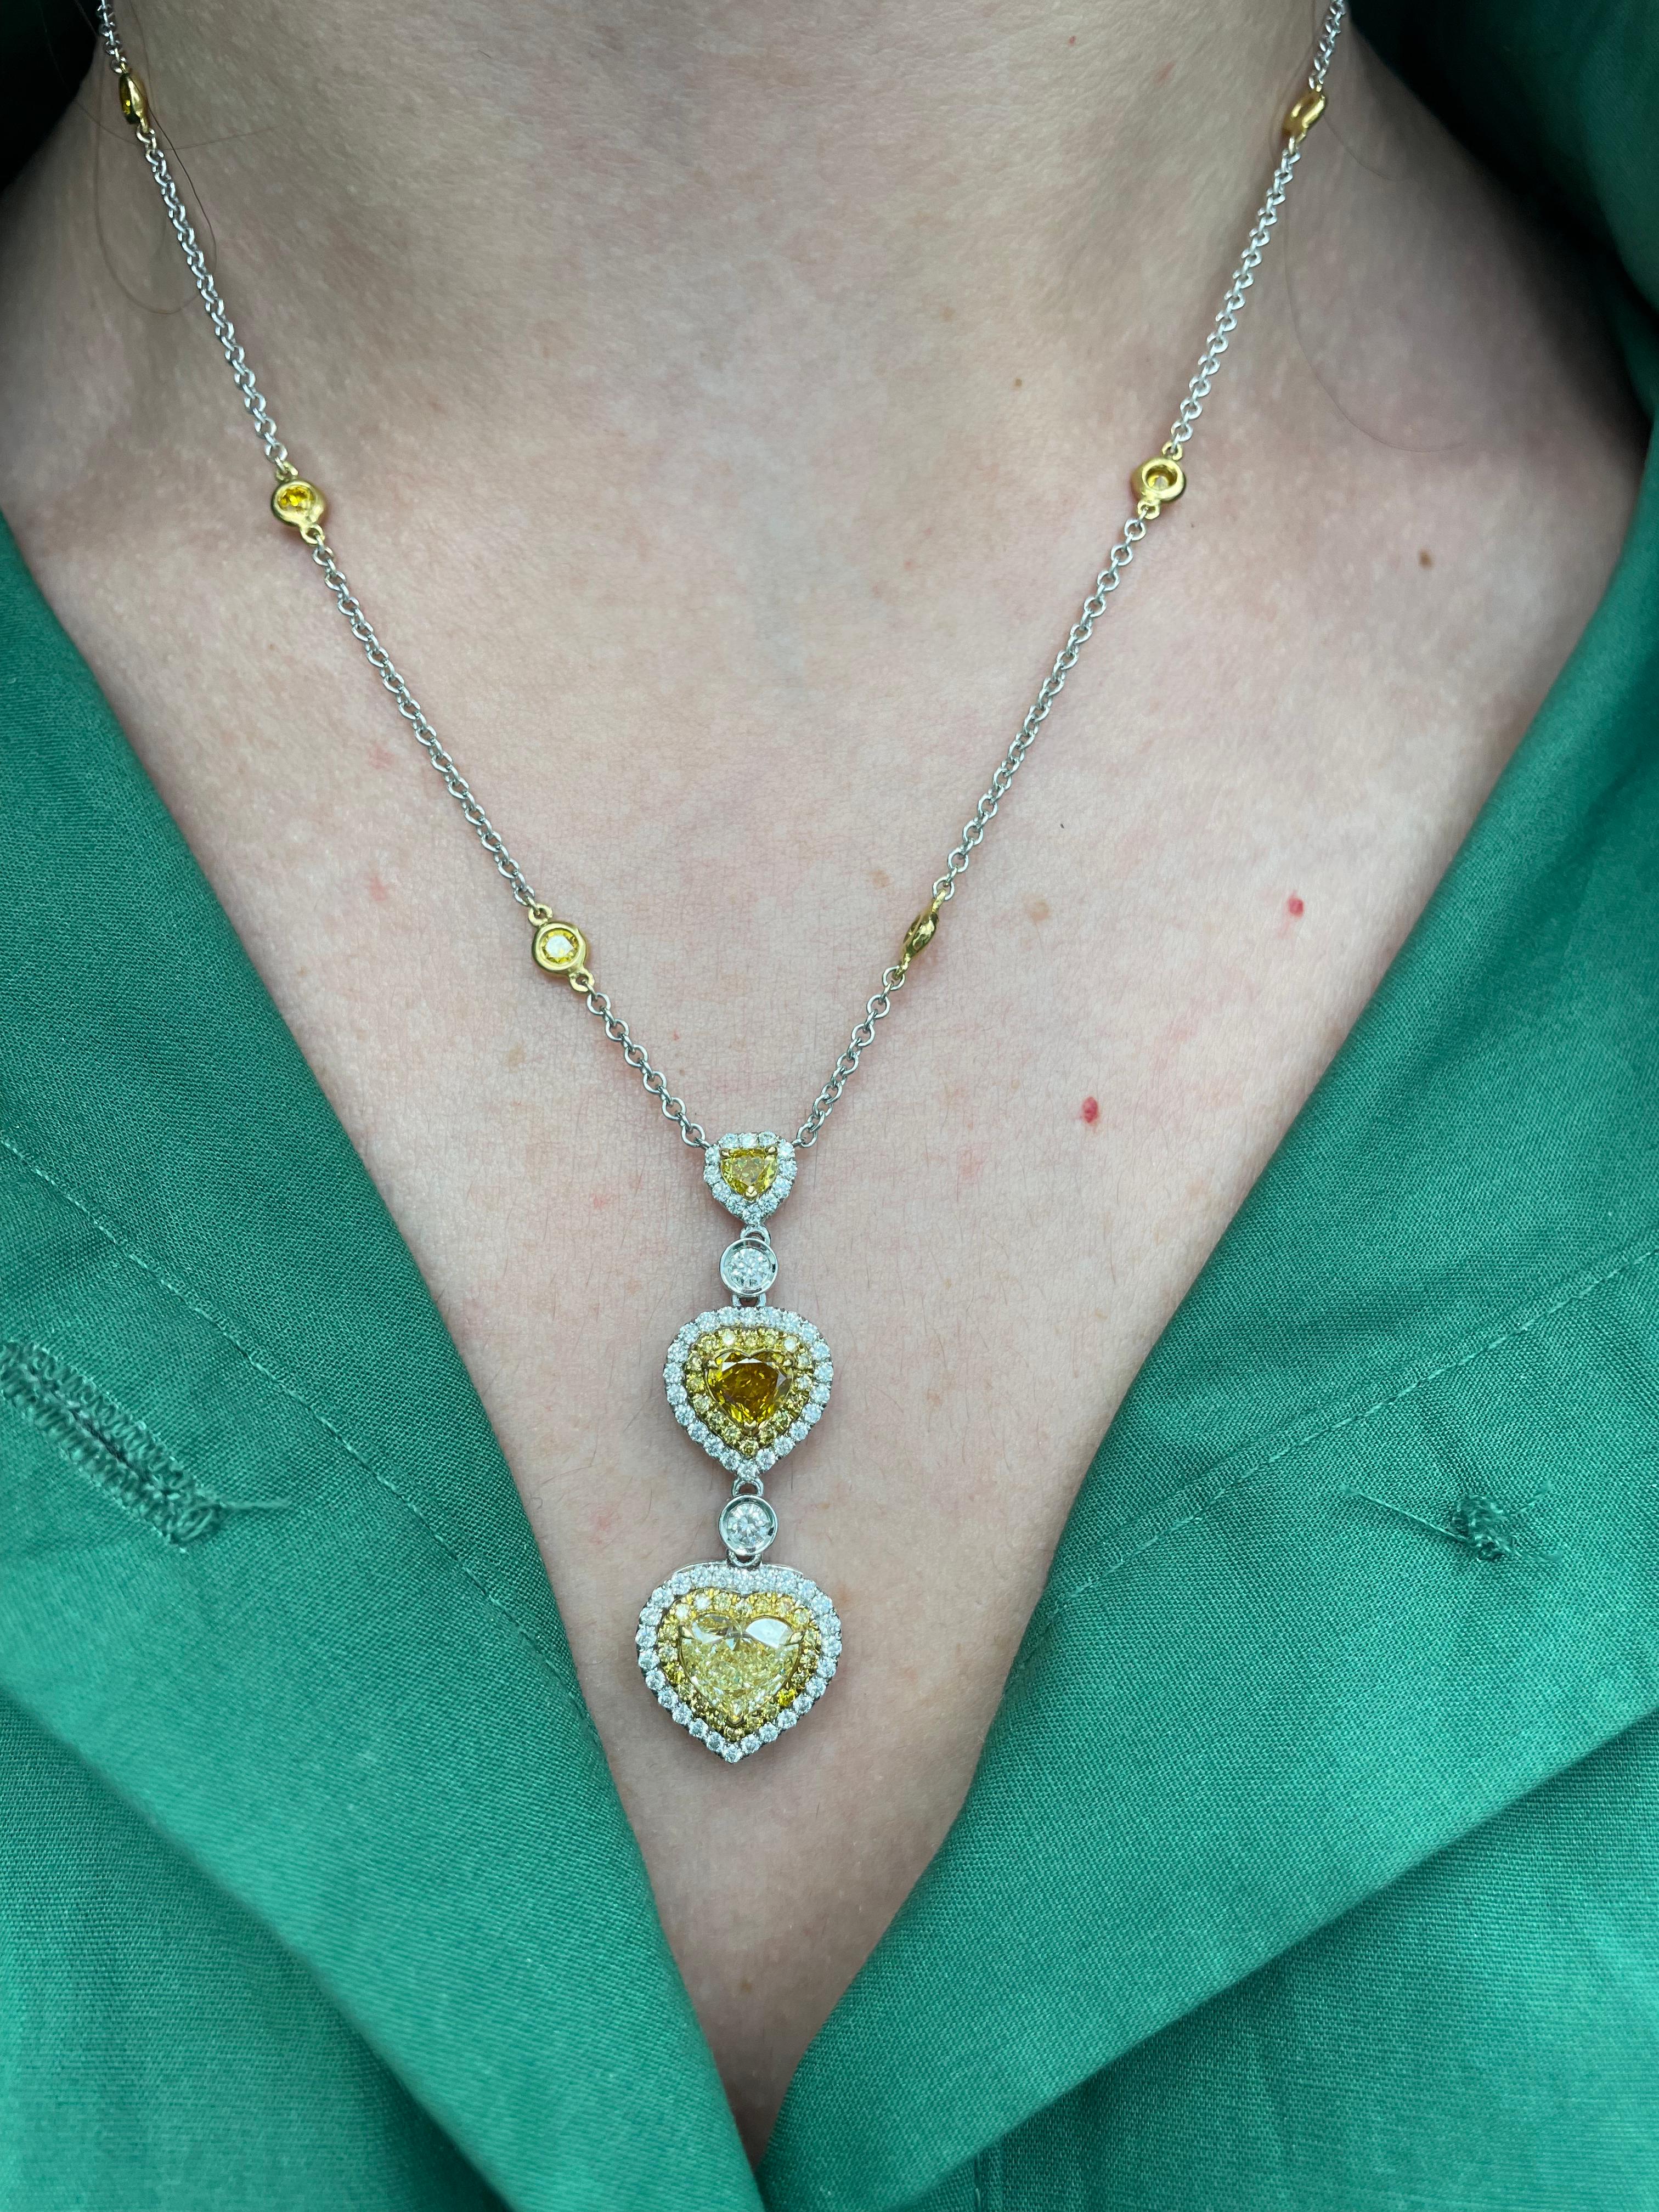 Exquisite heart shape fancy color diamond drop pendant necklace with double diamond halos GIA certified, by Alexander Beverly Hills.
3 heart shape diamonds ranging from Fancy Yellow to Fancy Deep Orange-Yellow color grade, 2.47ct. Complimented by